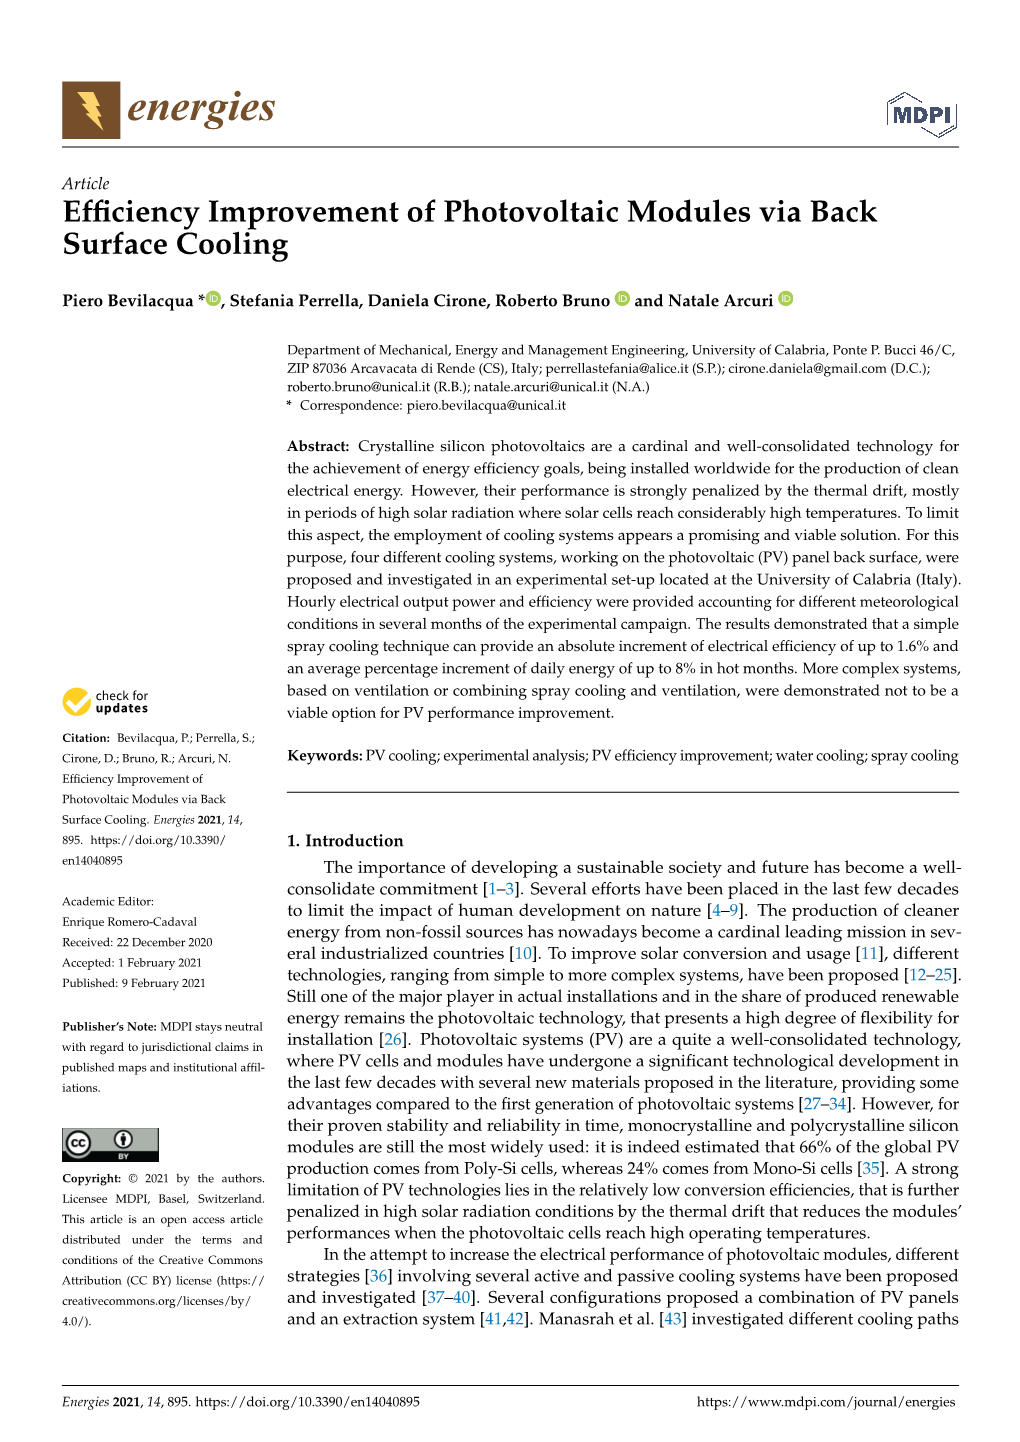 Efficiency Improvement of Photovoltaic Modules Via Back Surface Cooling